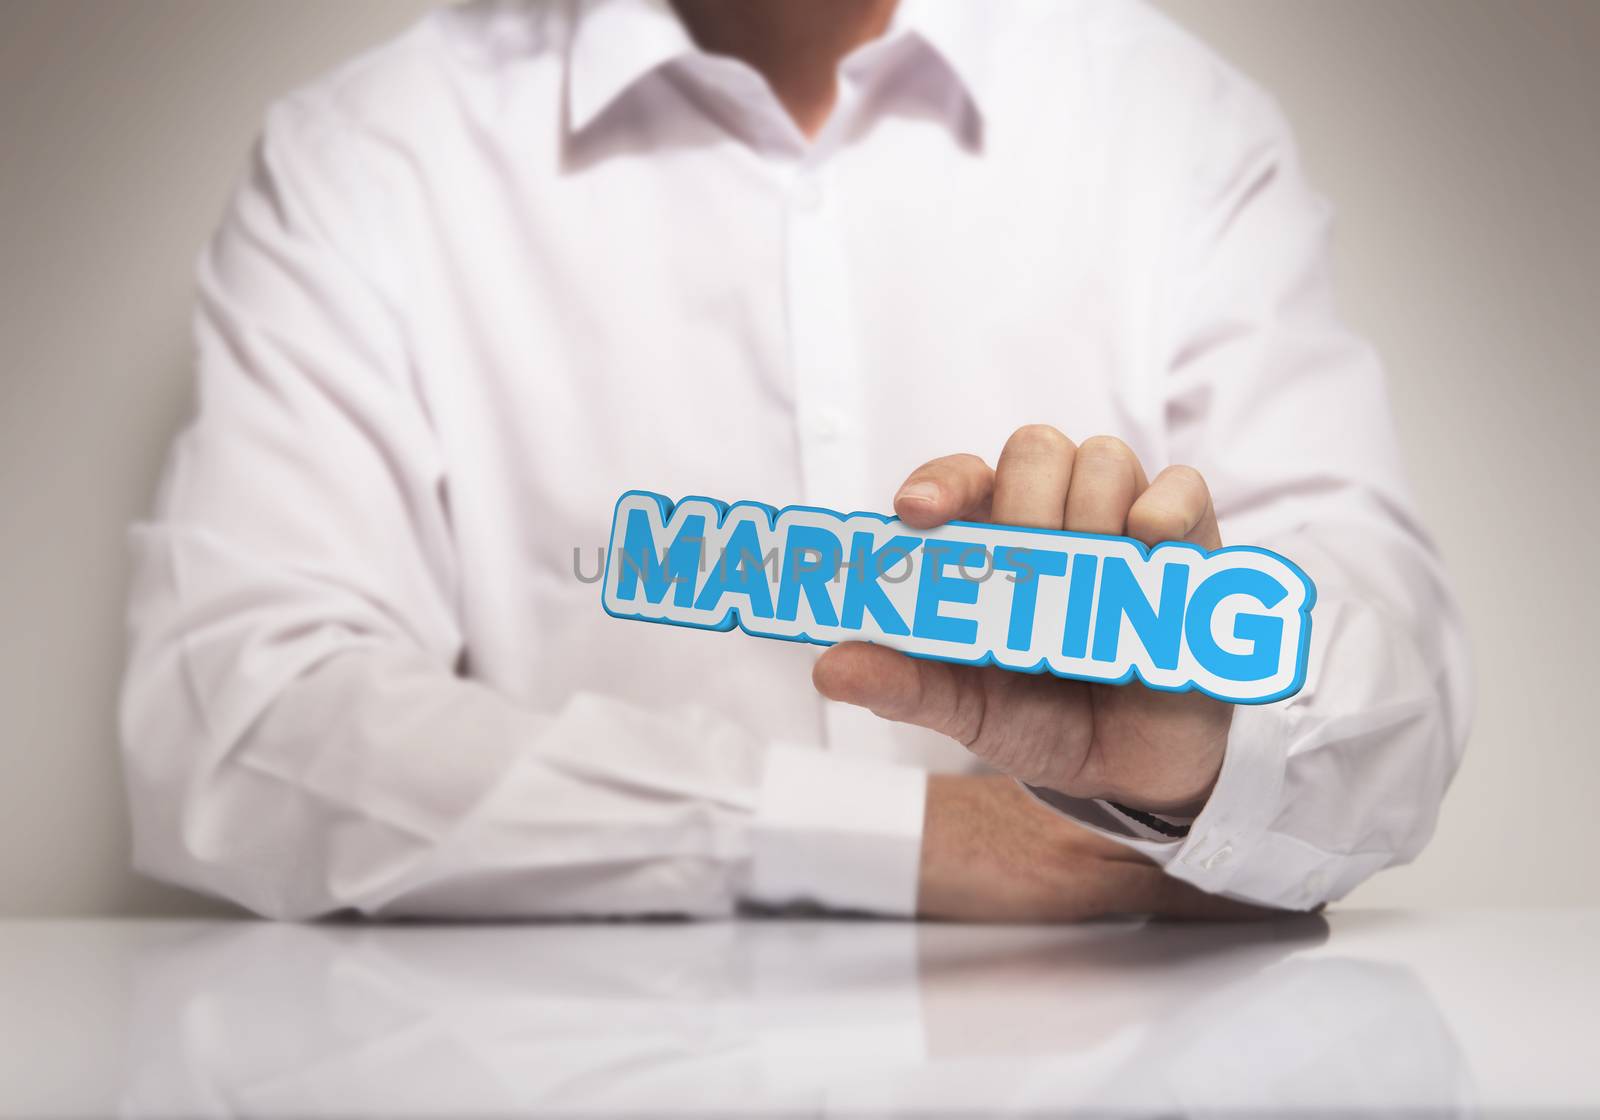 Marketing by Olivier-Le-Moal